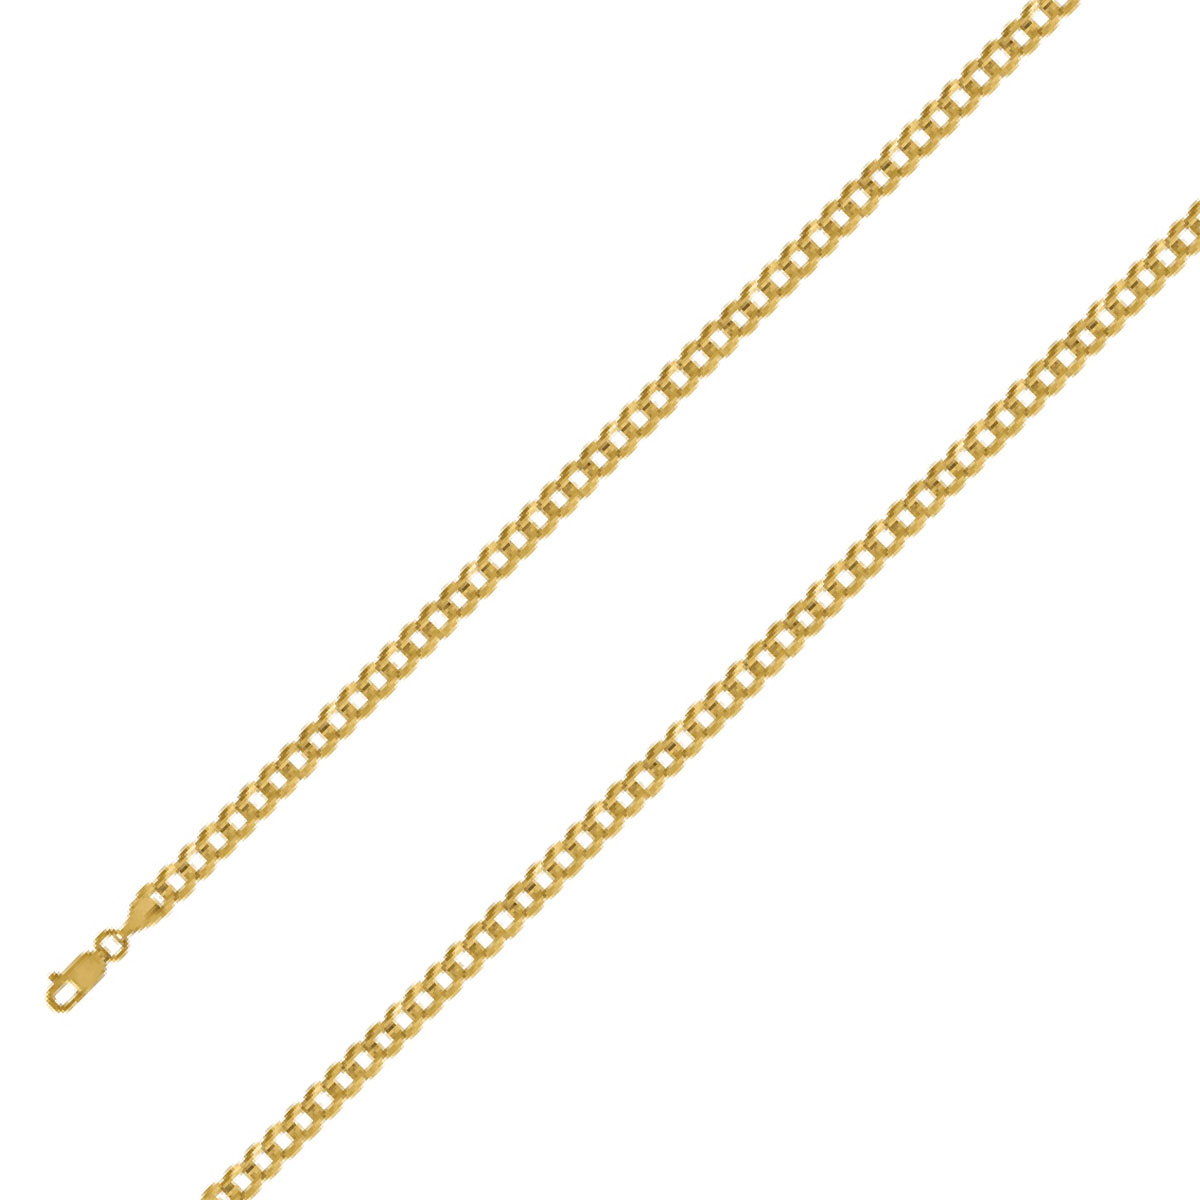 14K Yellow Gold Men Women's 4.3MM Cuban Curb Chain Lobster Clasp (7.5) - image 1 of 3